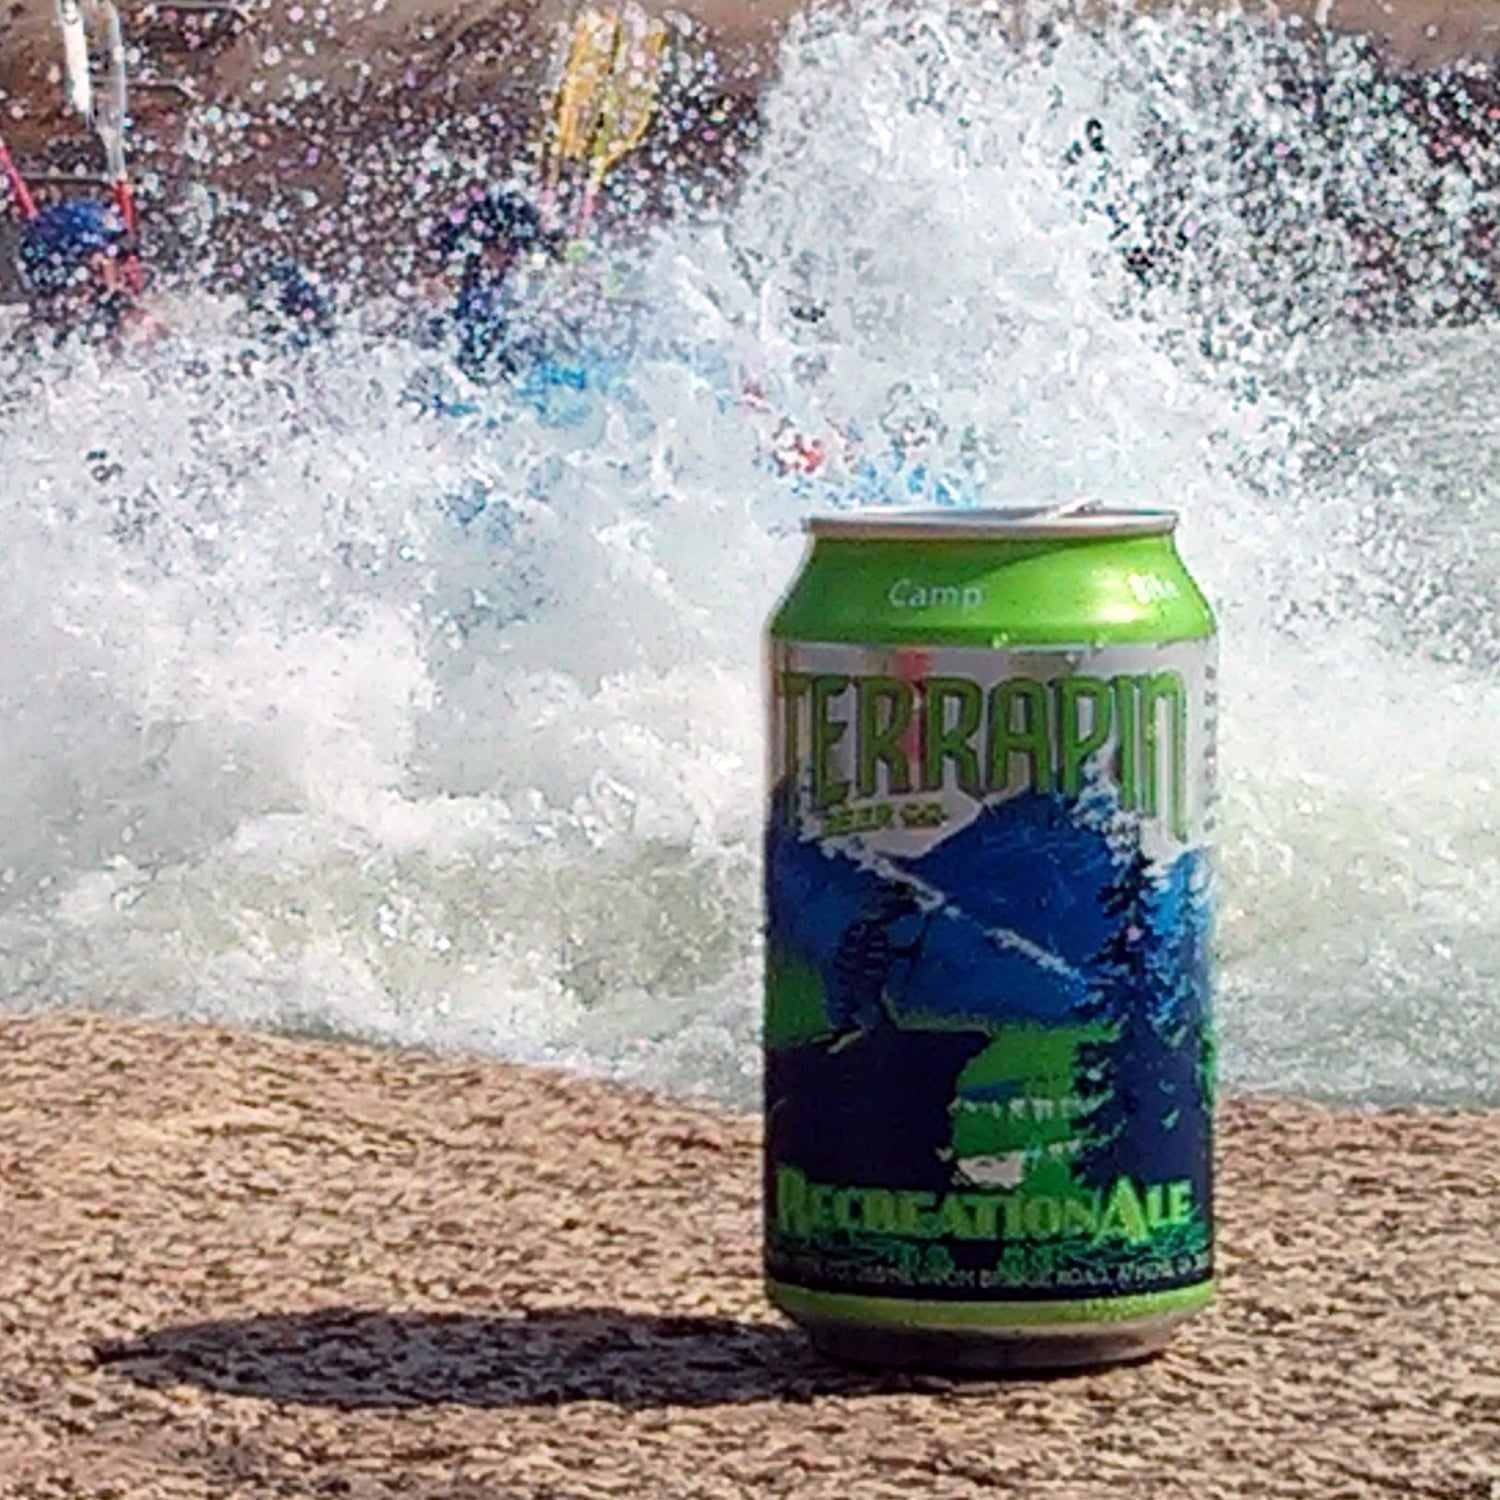 RecreationAle, terrapin beer company, canned beers, outside